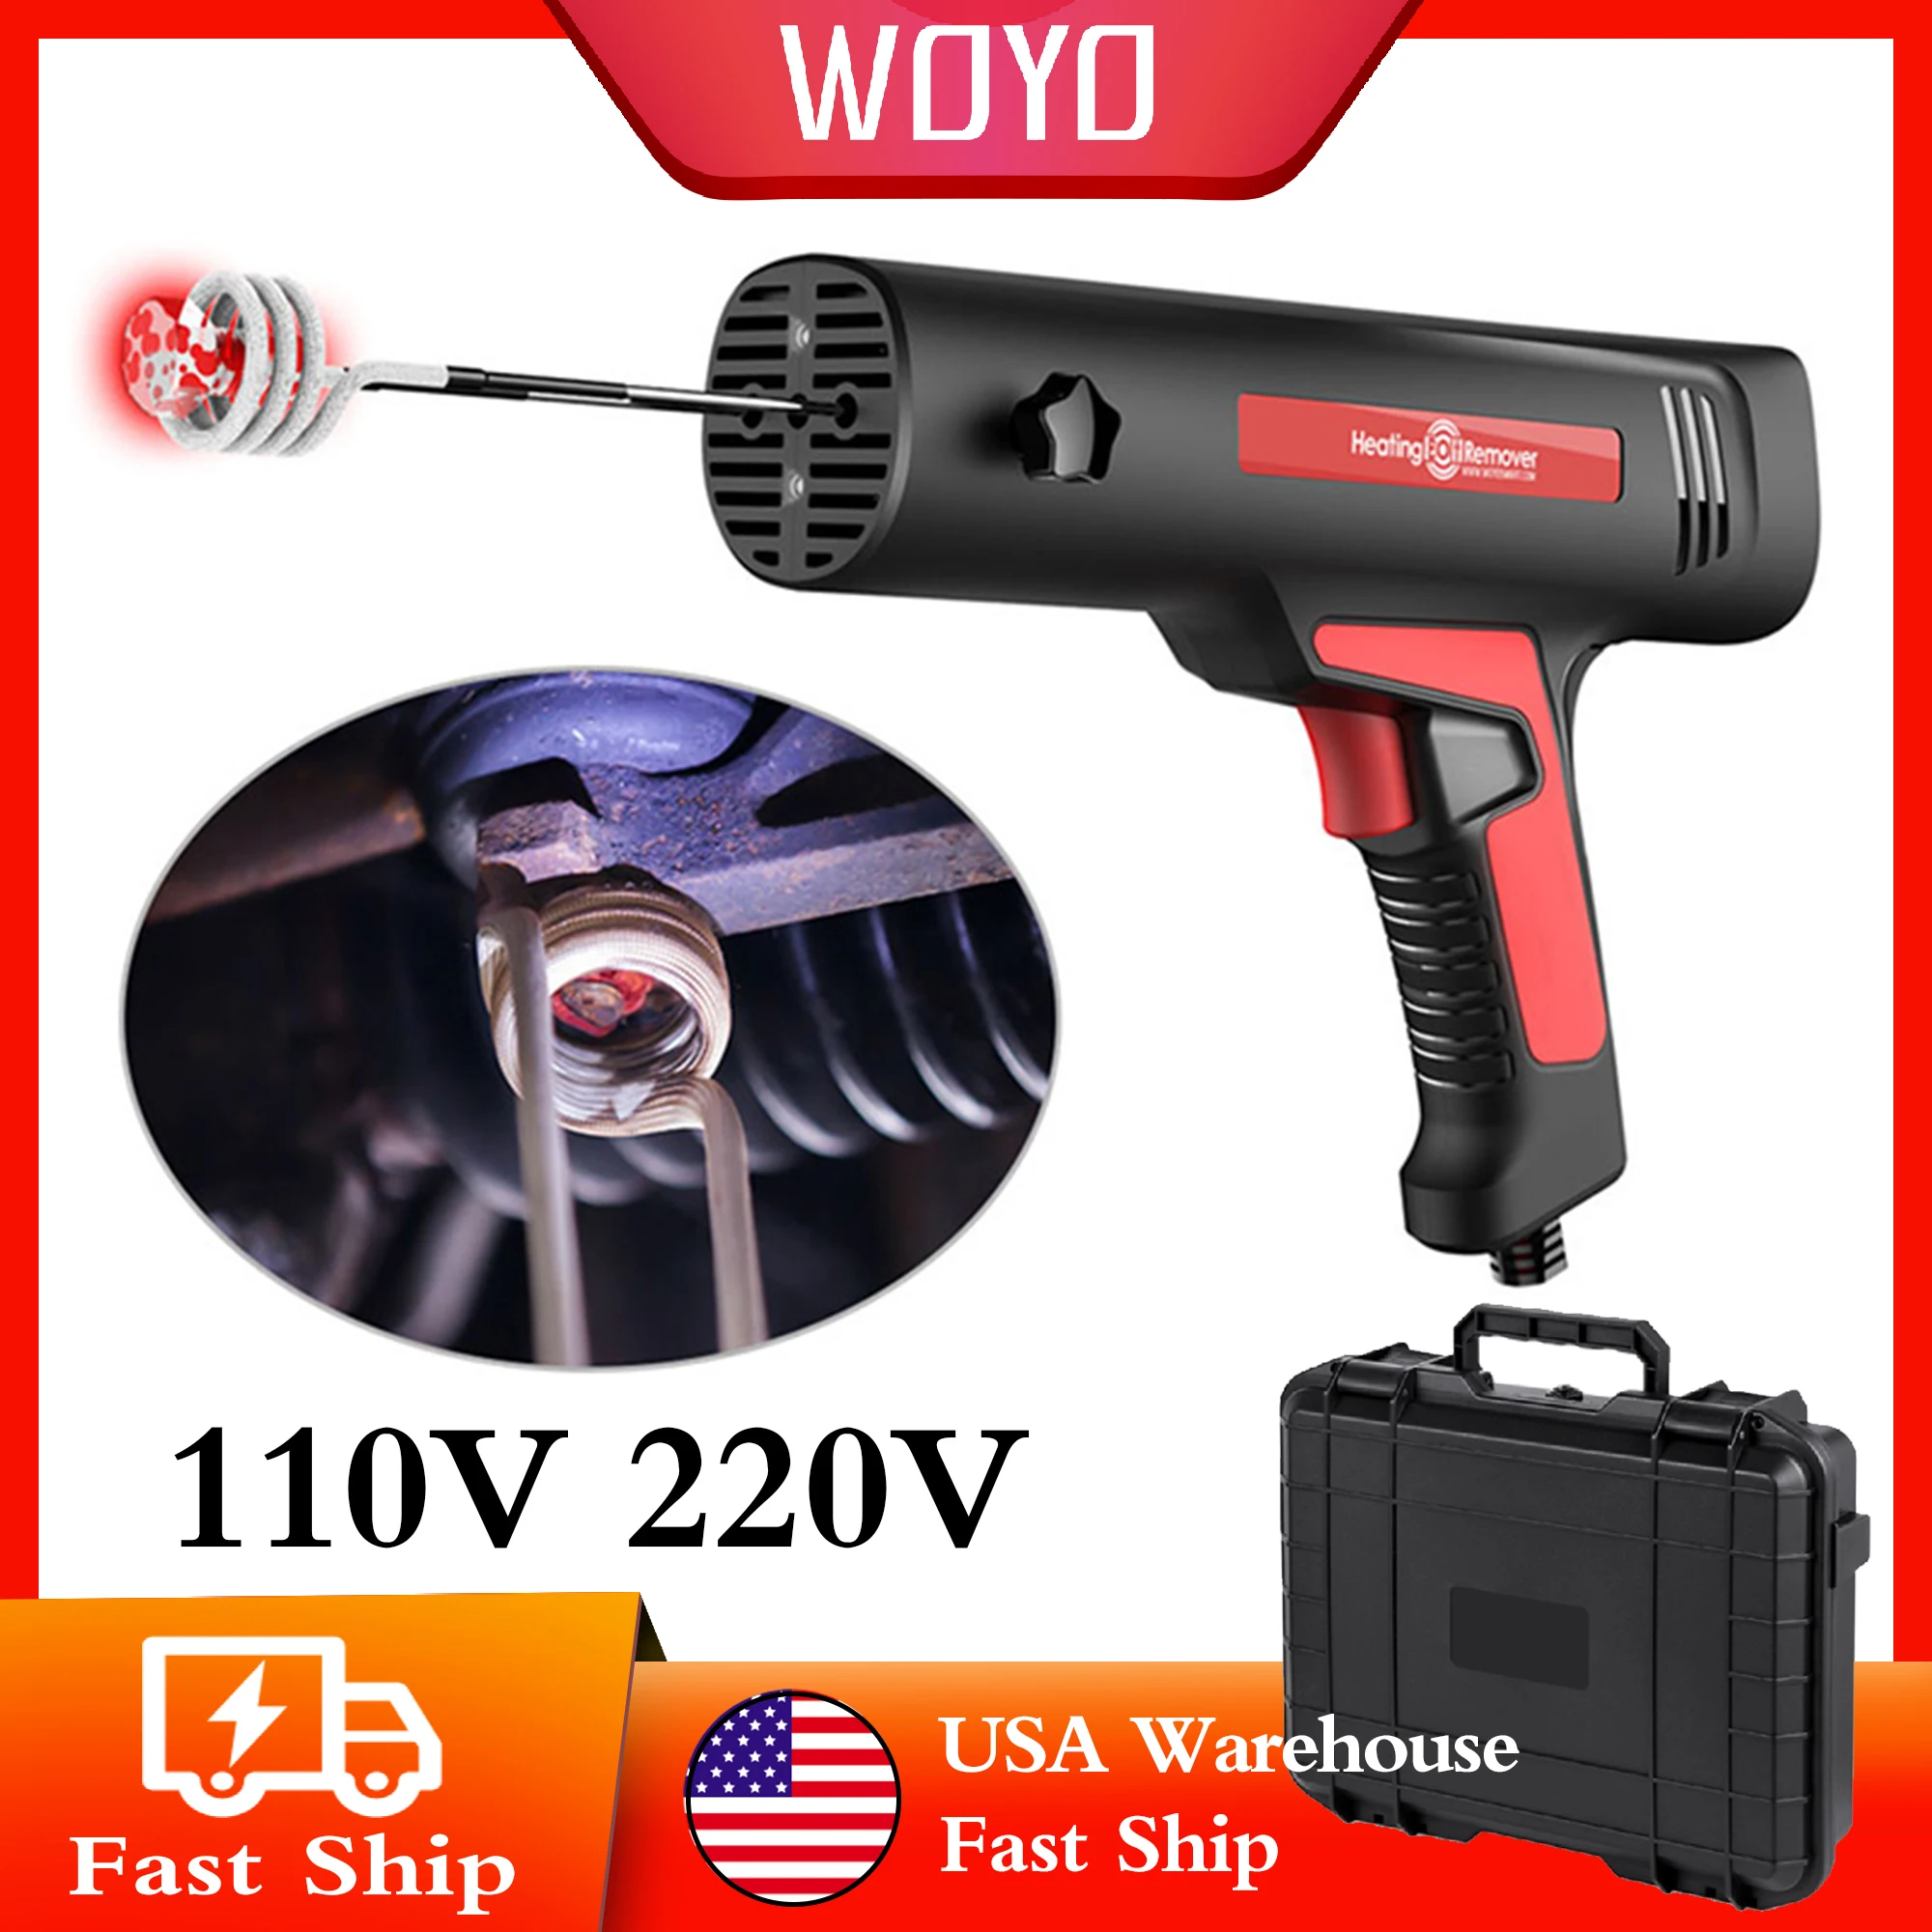 

WOYO Flameless Induction Bolt Heater Coil Kit, 110V/220V 30s Quickly Heat Bolt Remover Rusted Nut Car Workshop Home Handel tools